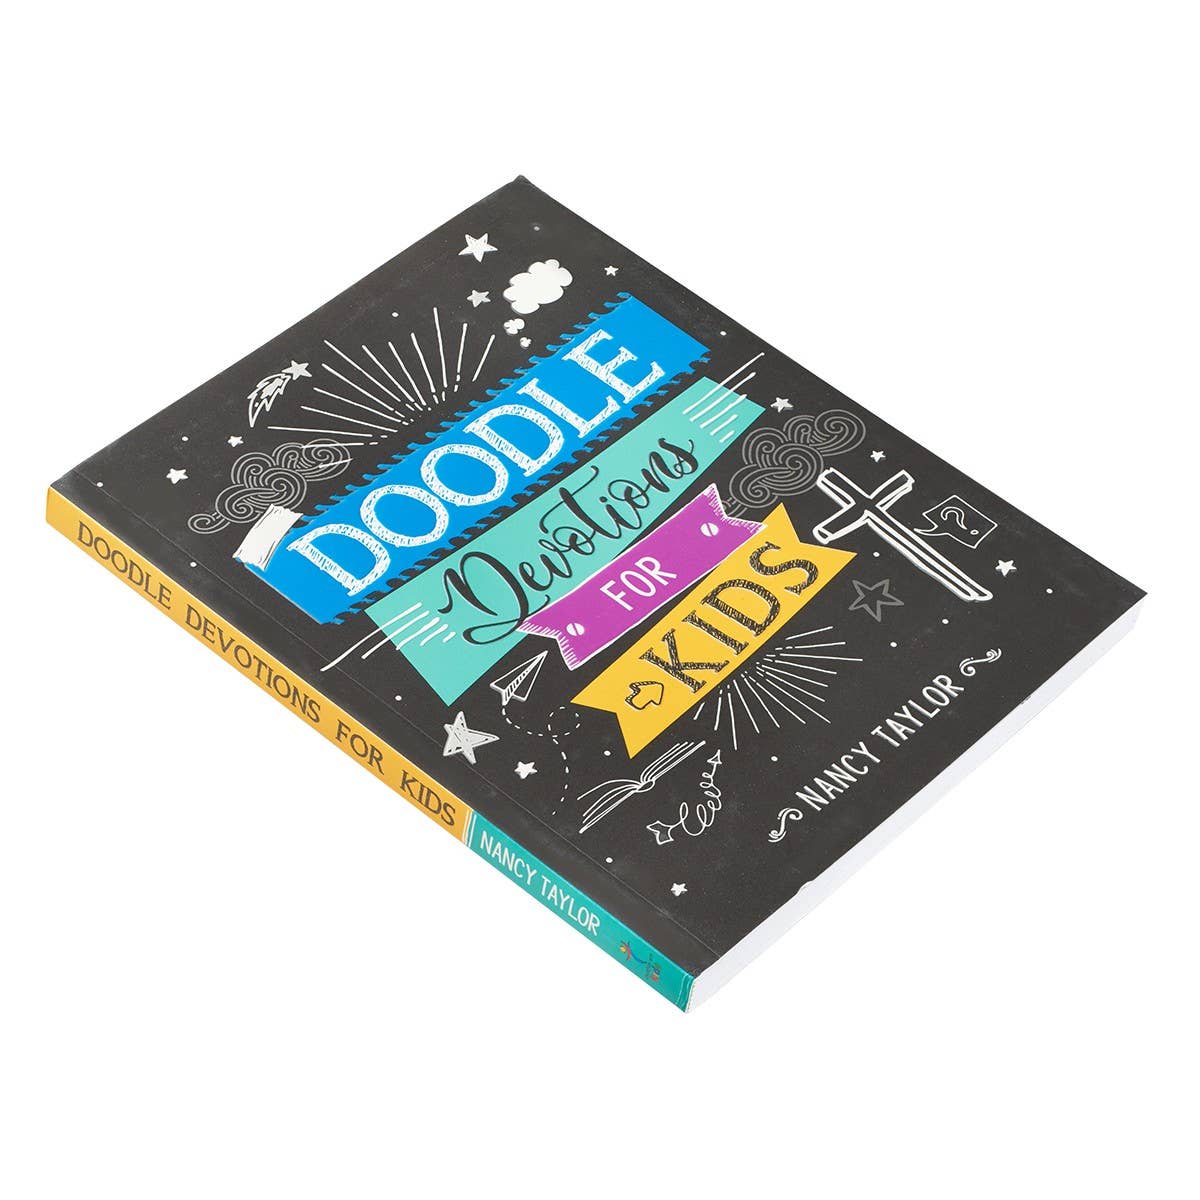 Christian Art Gifts - Doodle Devotions for Kids